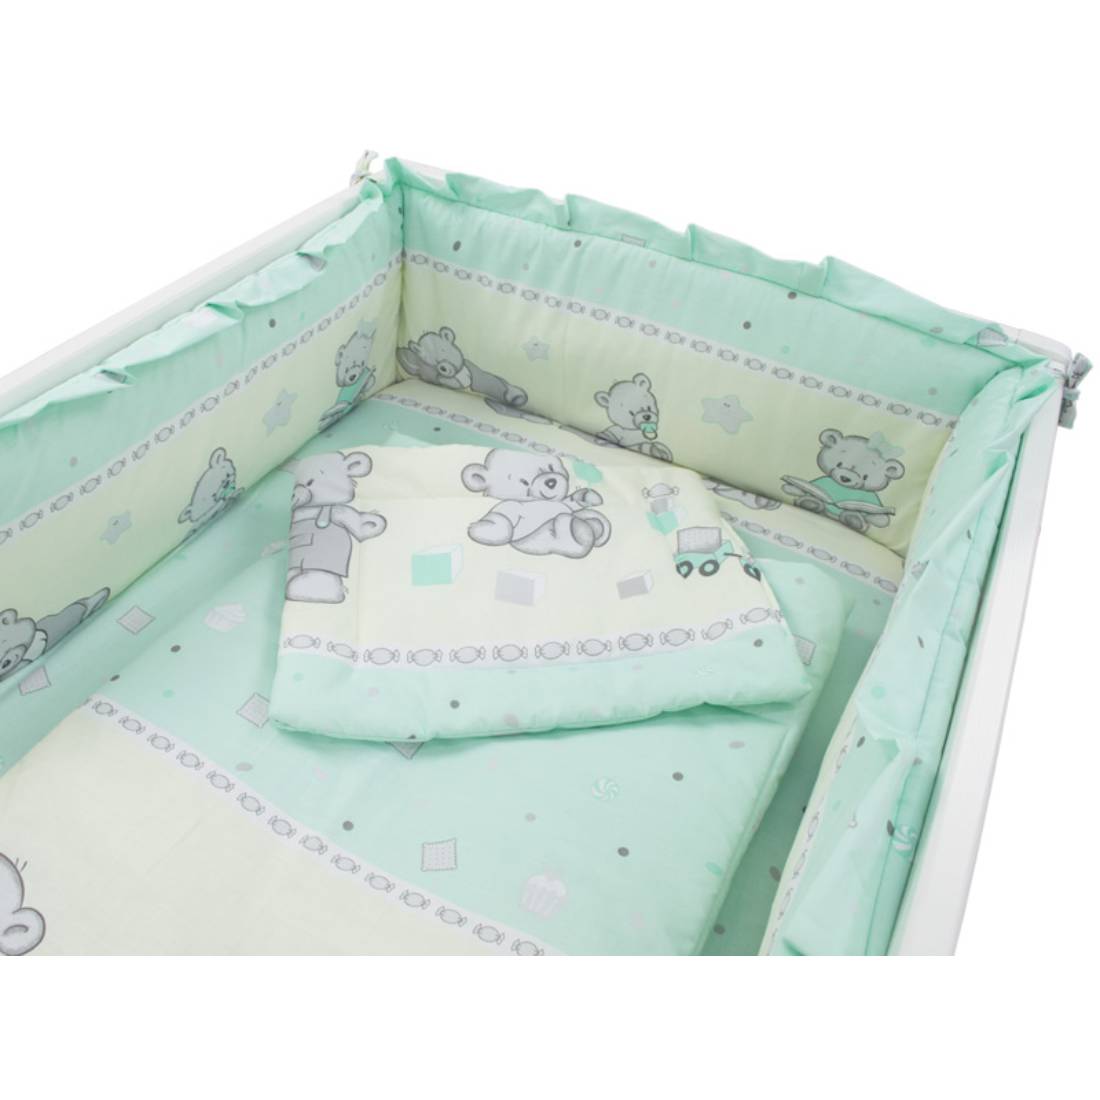 Lenjerie Mykids Teddy Toys Turquoise, 4 piese, M2, 120×60 cm